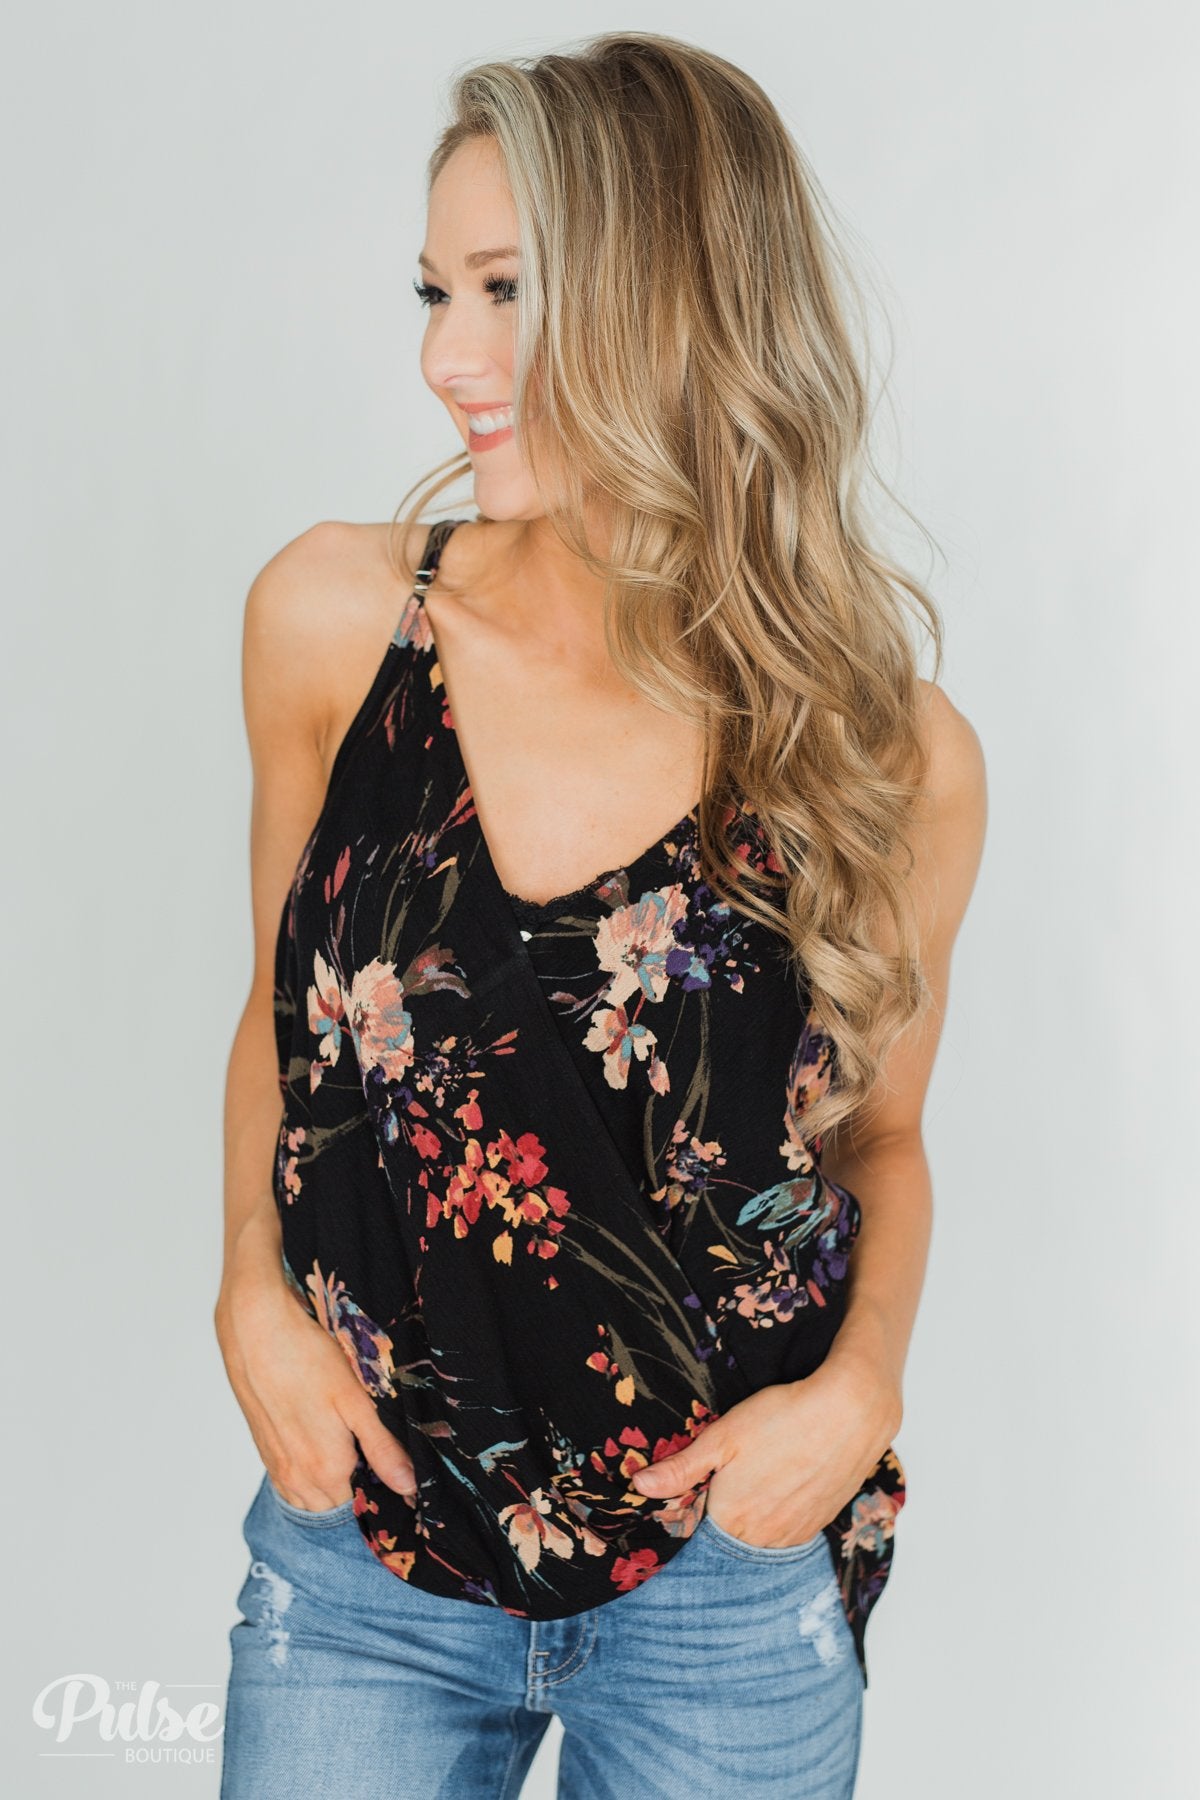 Beginning to Blossom Floral Tank Top - Black – The Pulse Boutique